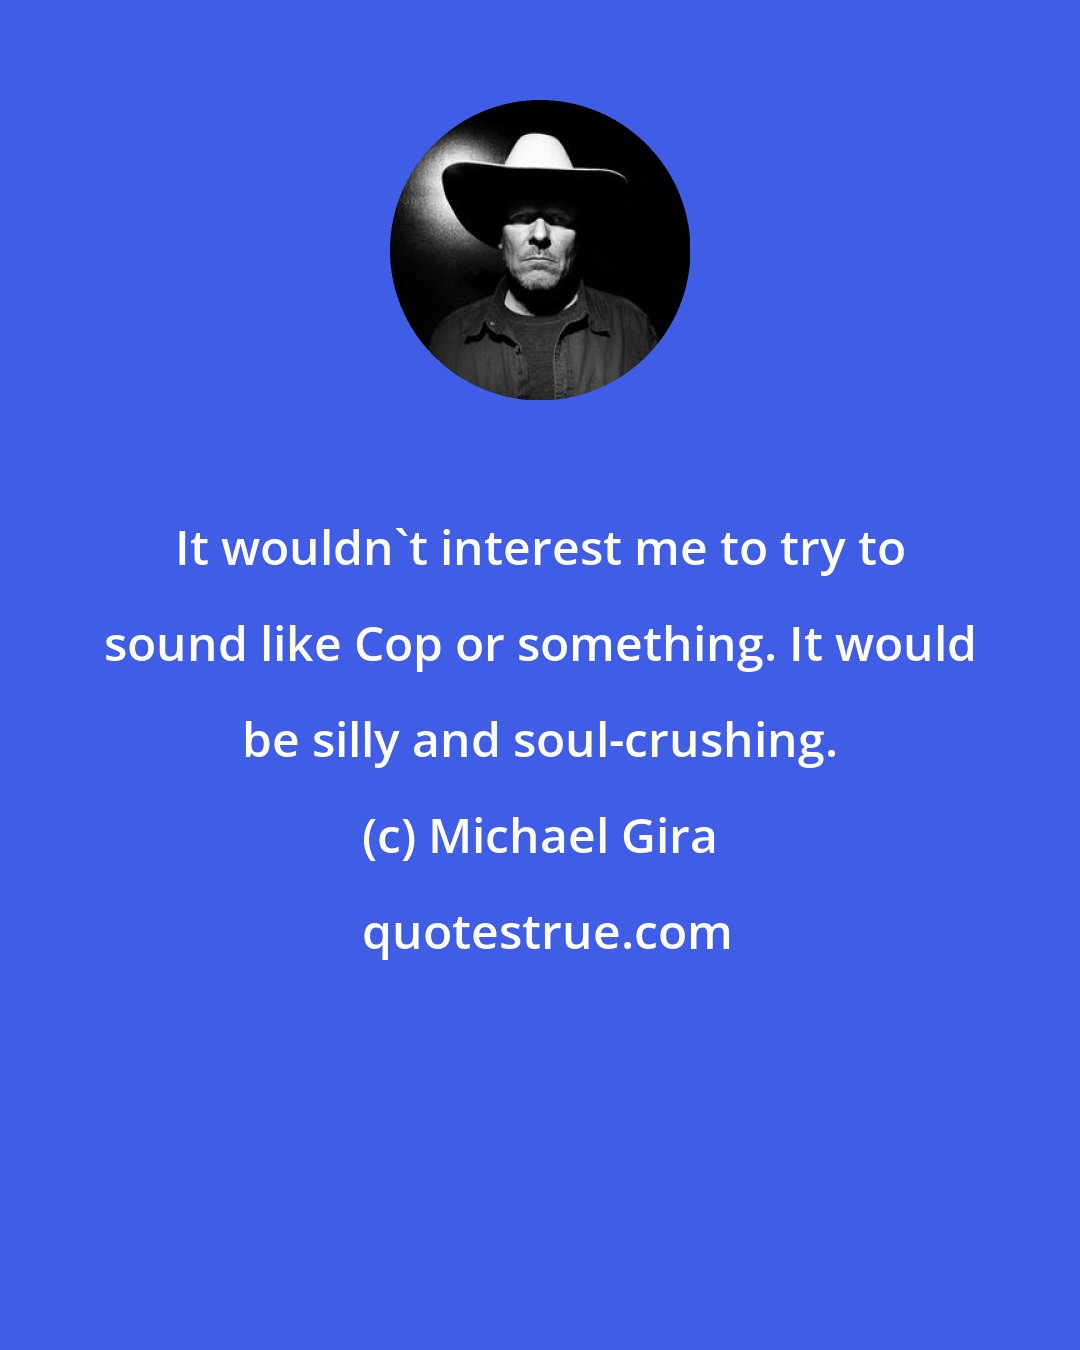 Michael Gira: It wouldn't interest me to try to sound like Cop or something. It would be silly and soul-crushing.